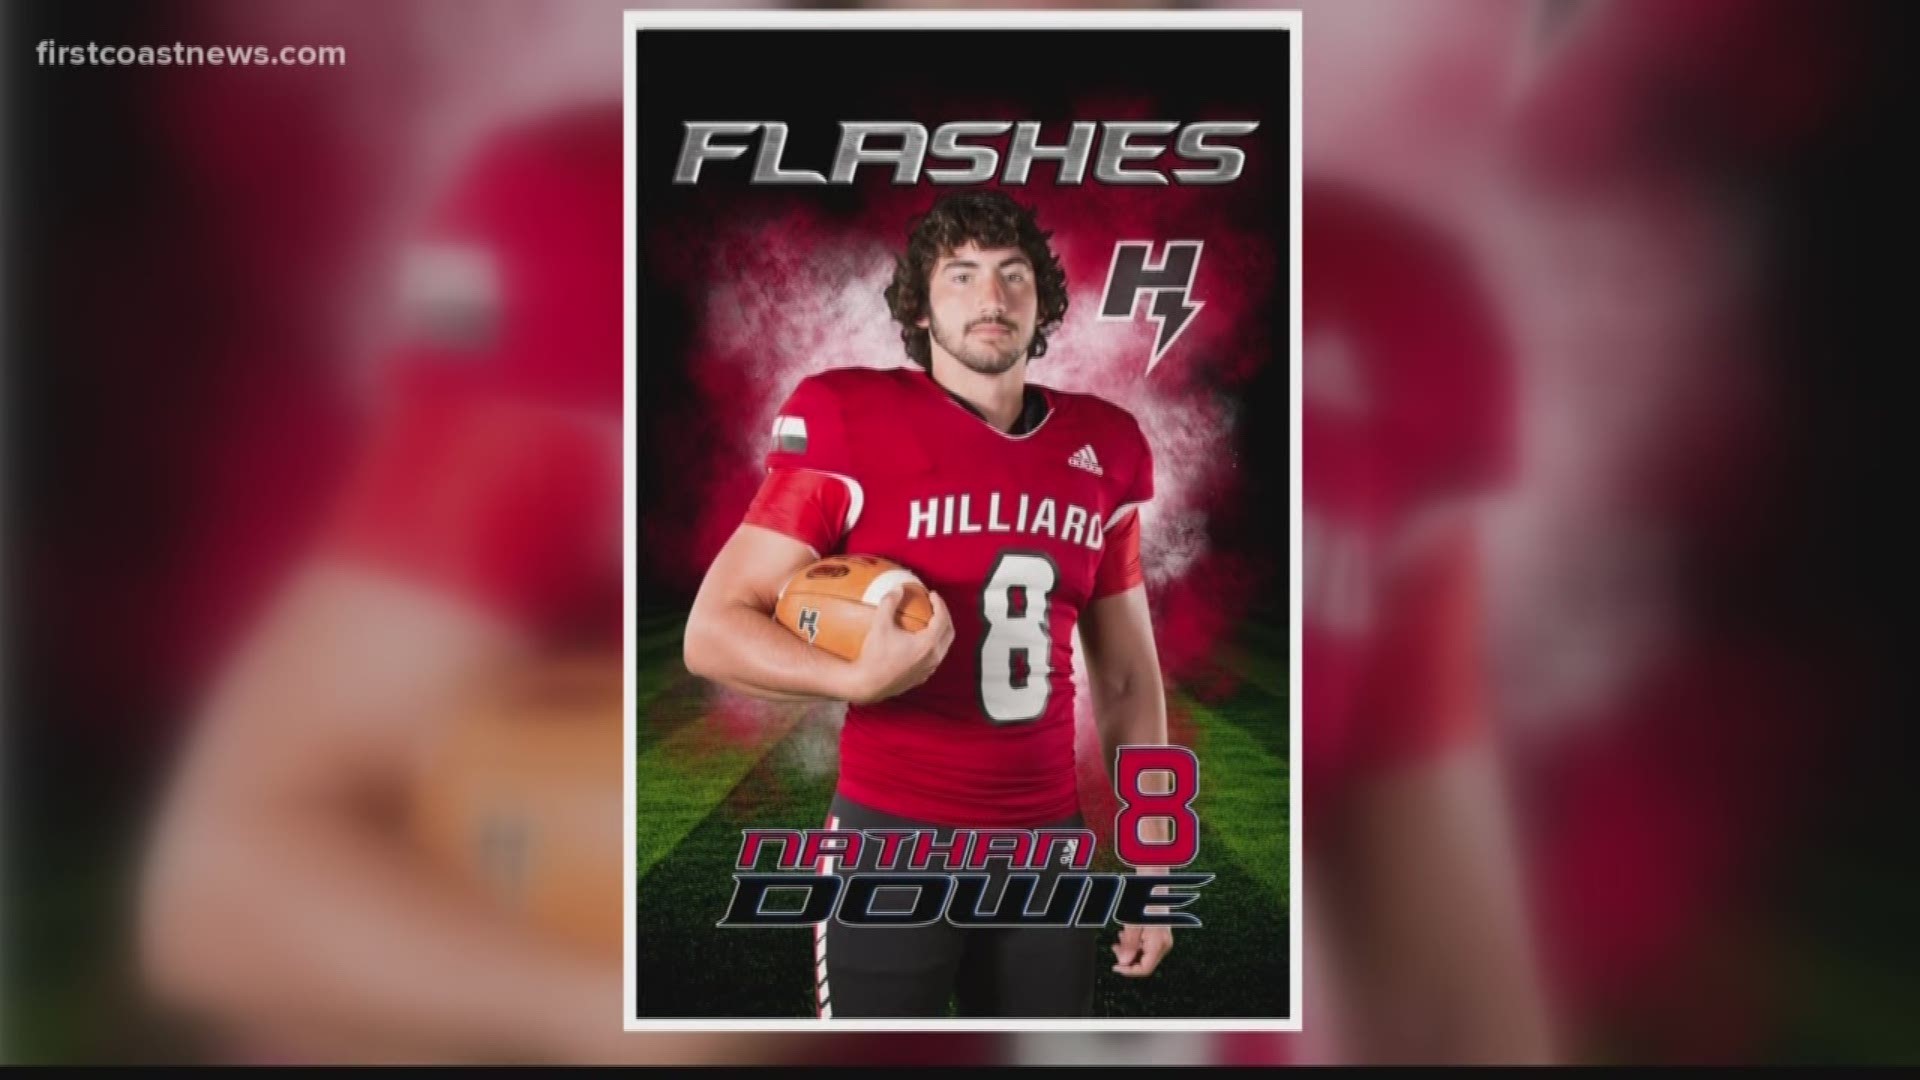 Nathan Dowie, quarterback for the Hilliard Flashes was hospitalized after Friday's game due to a serious injury.